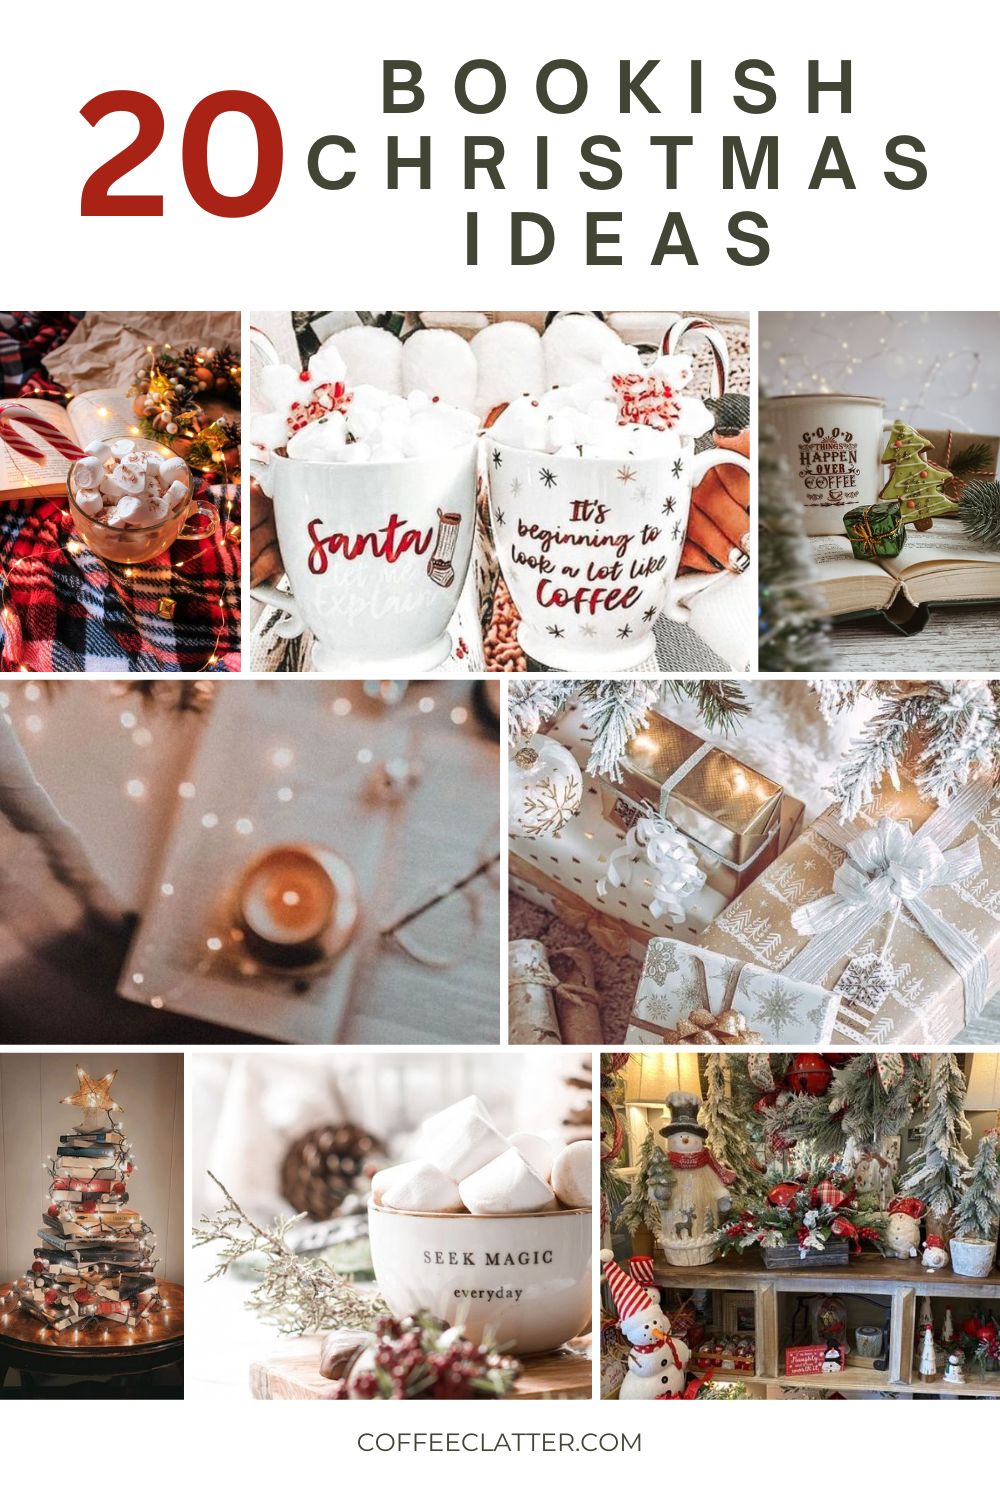 20-bookish-christmas-ideas-for-the-holidays-decor-book-lover-Coffee Clatter